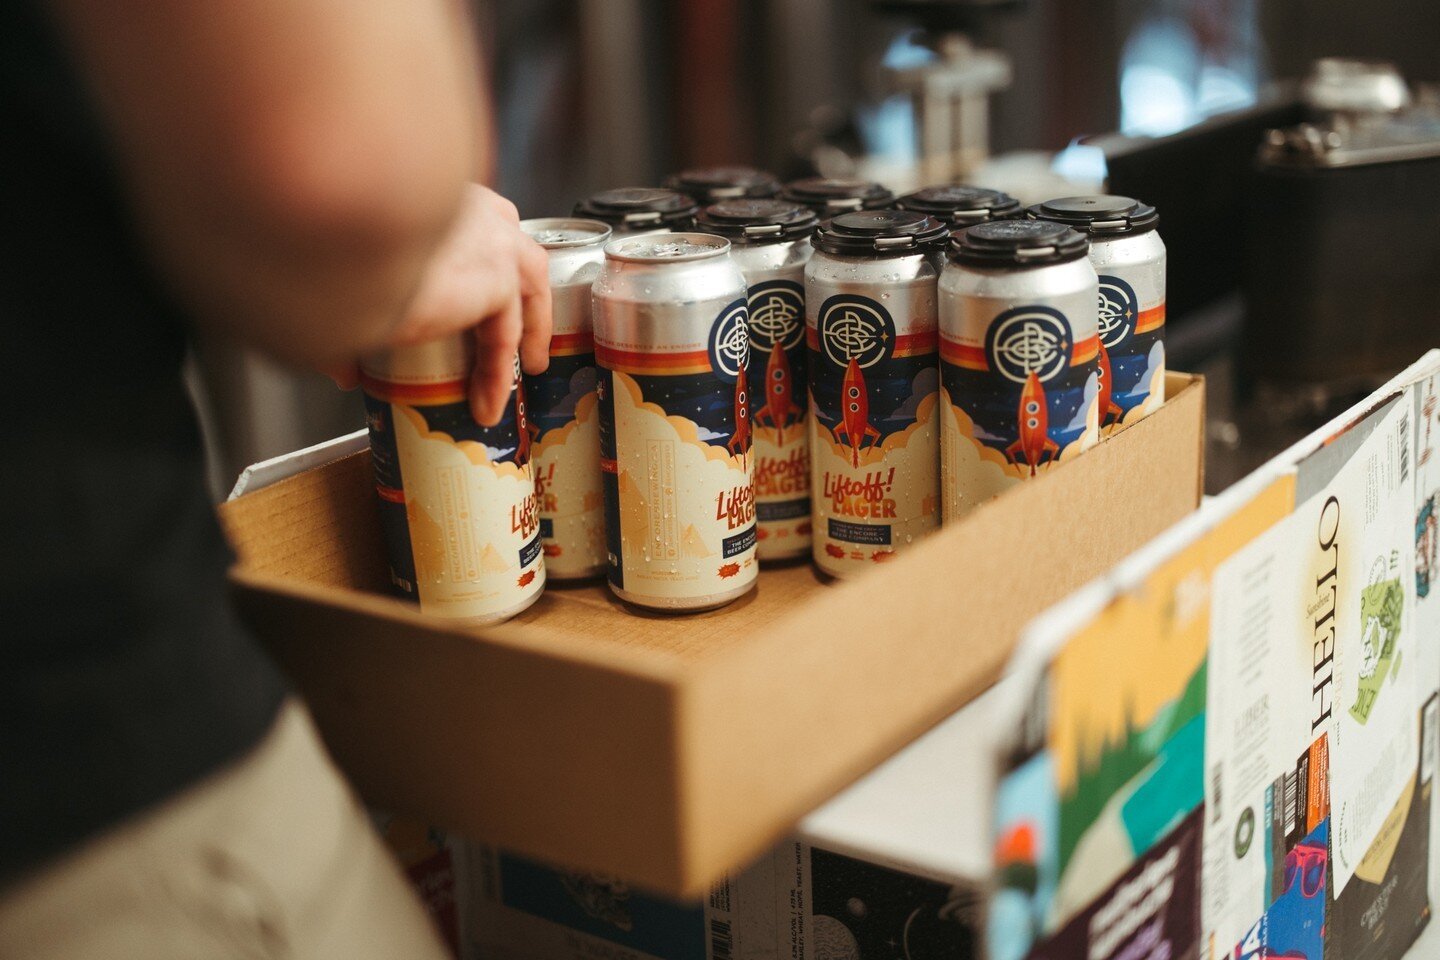 Launch into your weekend with a 4-pack of Liftoff Lager. ⁠
⁠
Remember, whatever you&rsquo;re doing, every adventure deserves an Encore. 🚀⁠